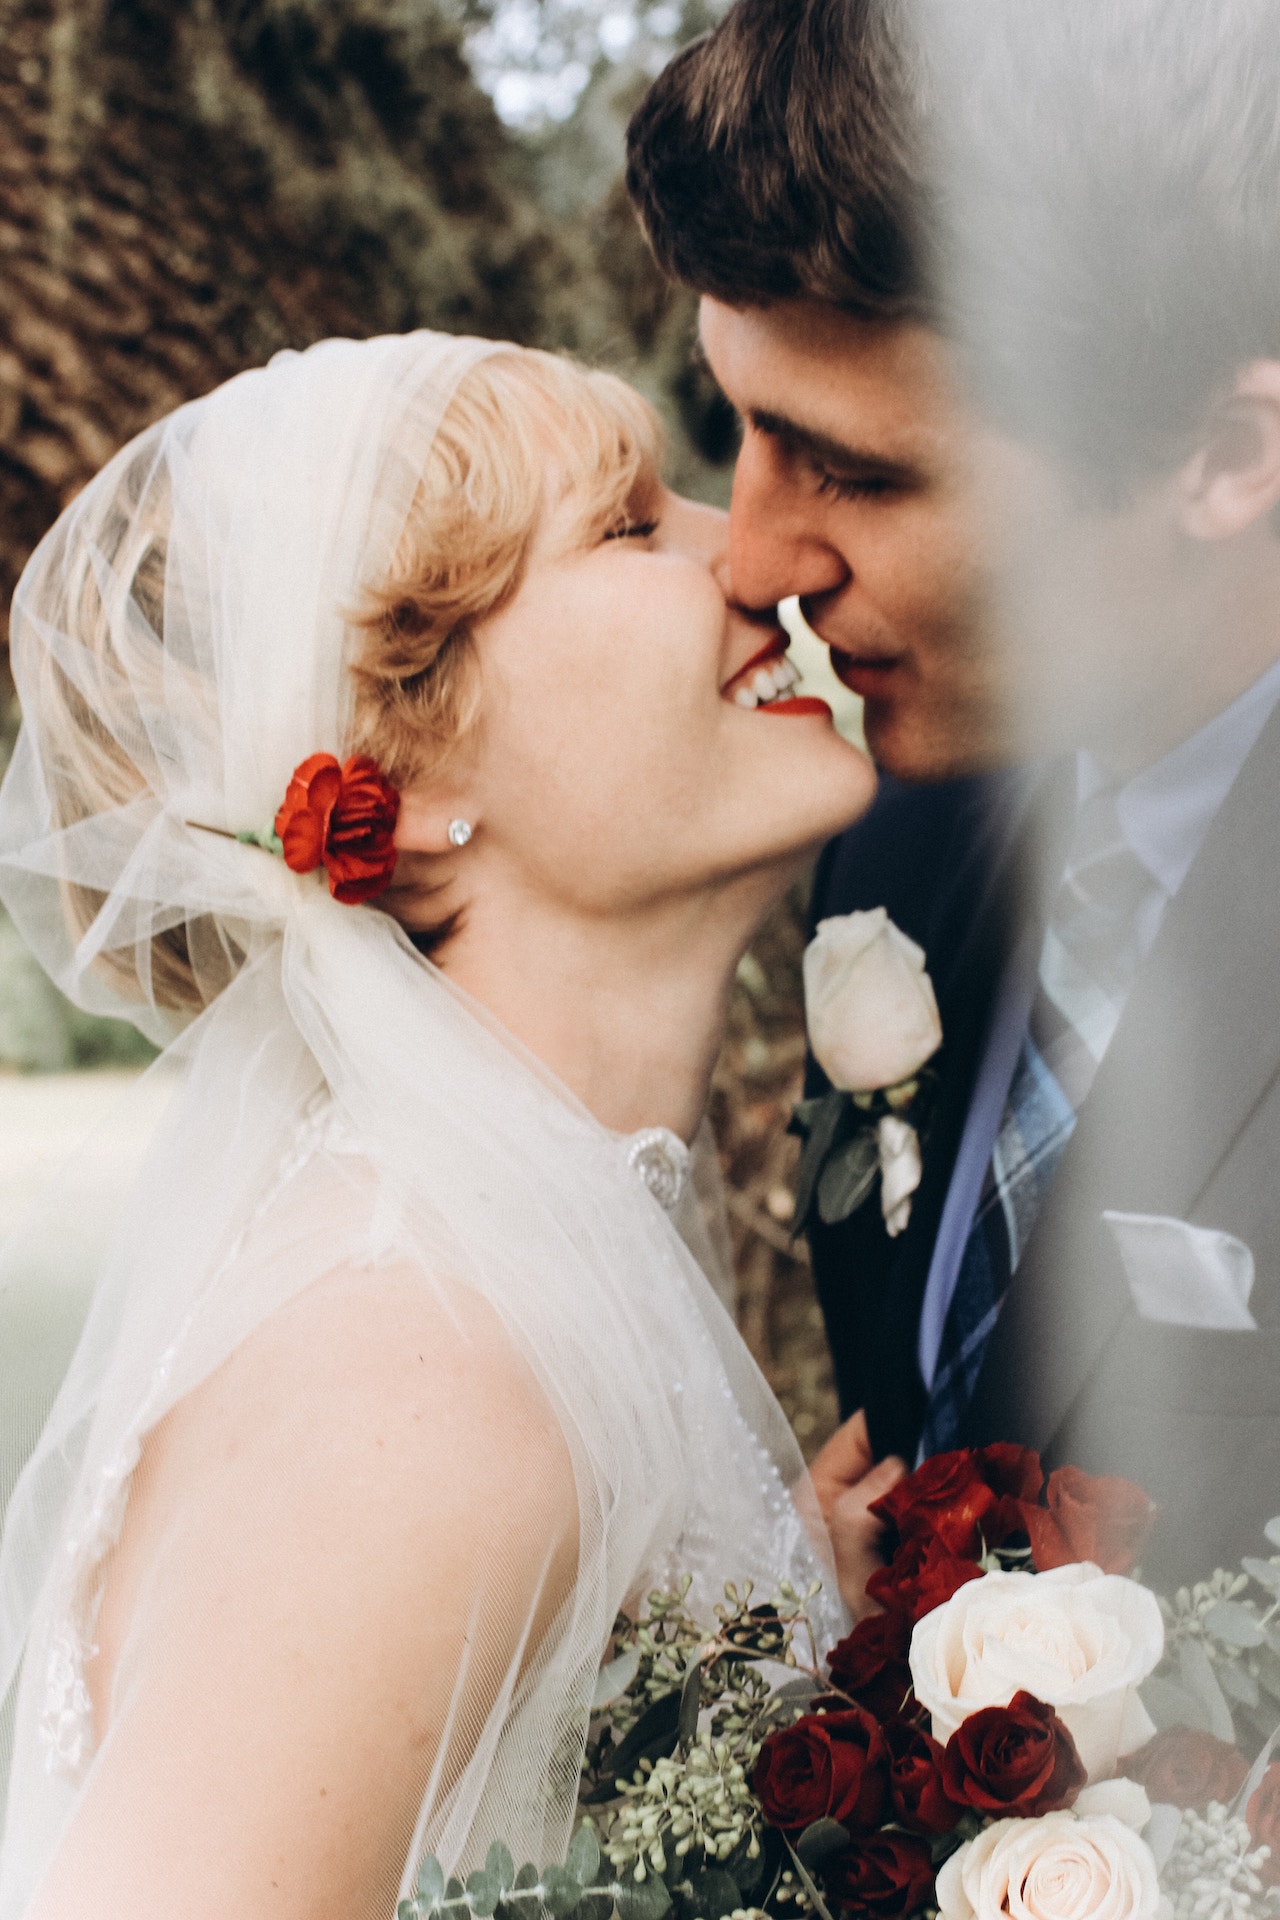 17 Things Every Woman Must Learn Before Marriage